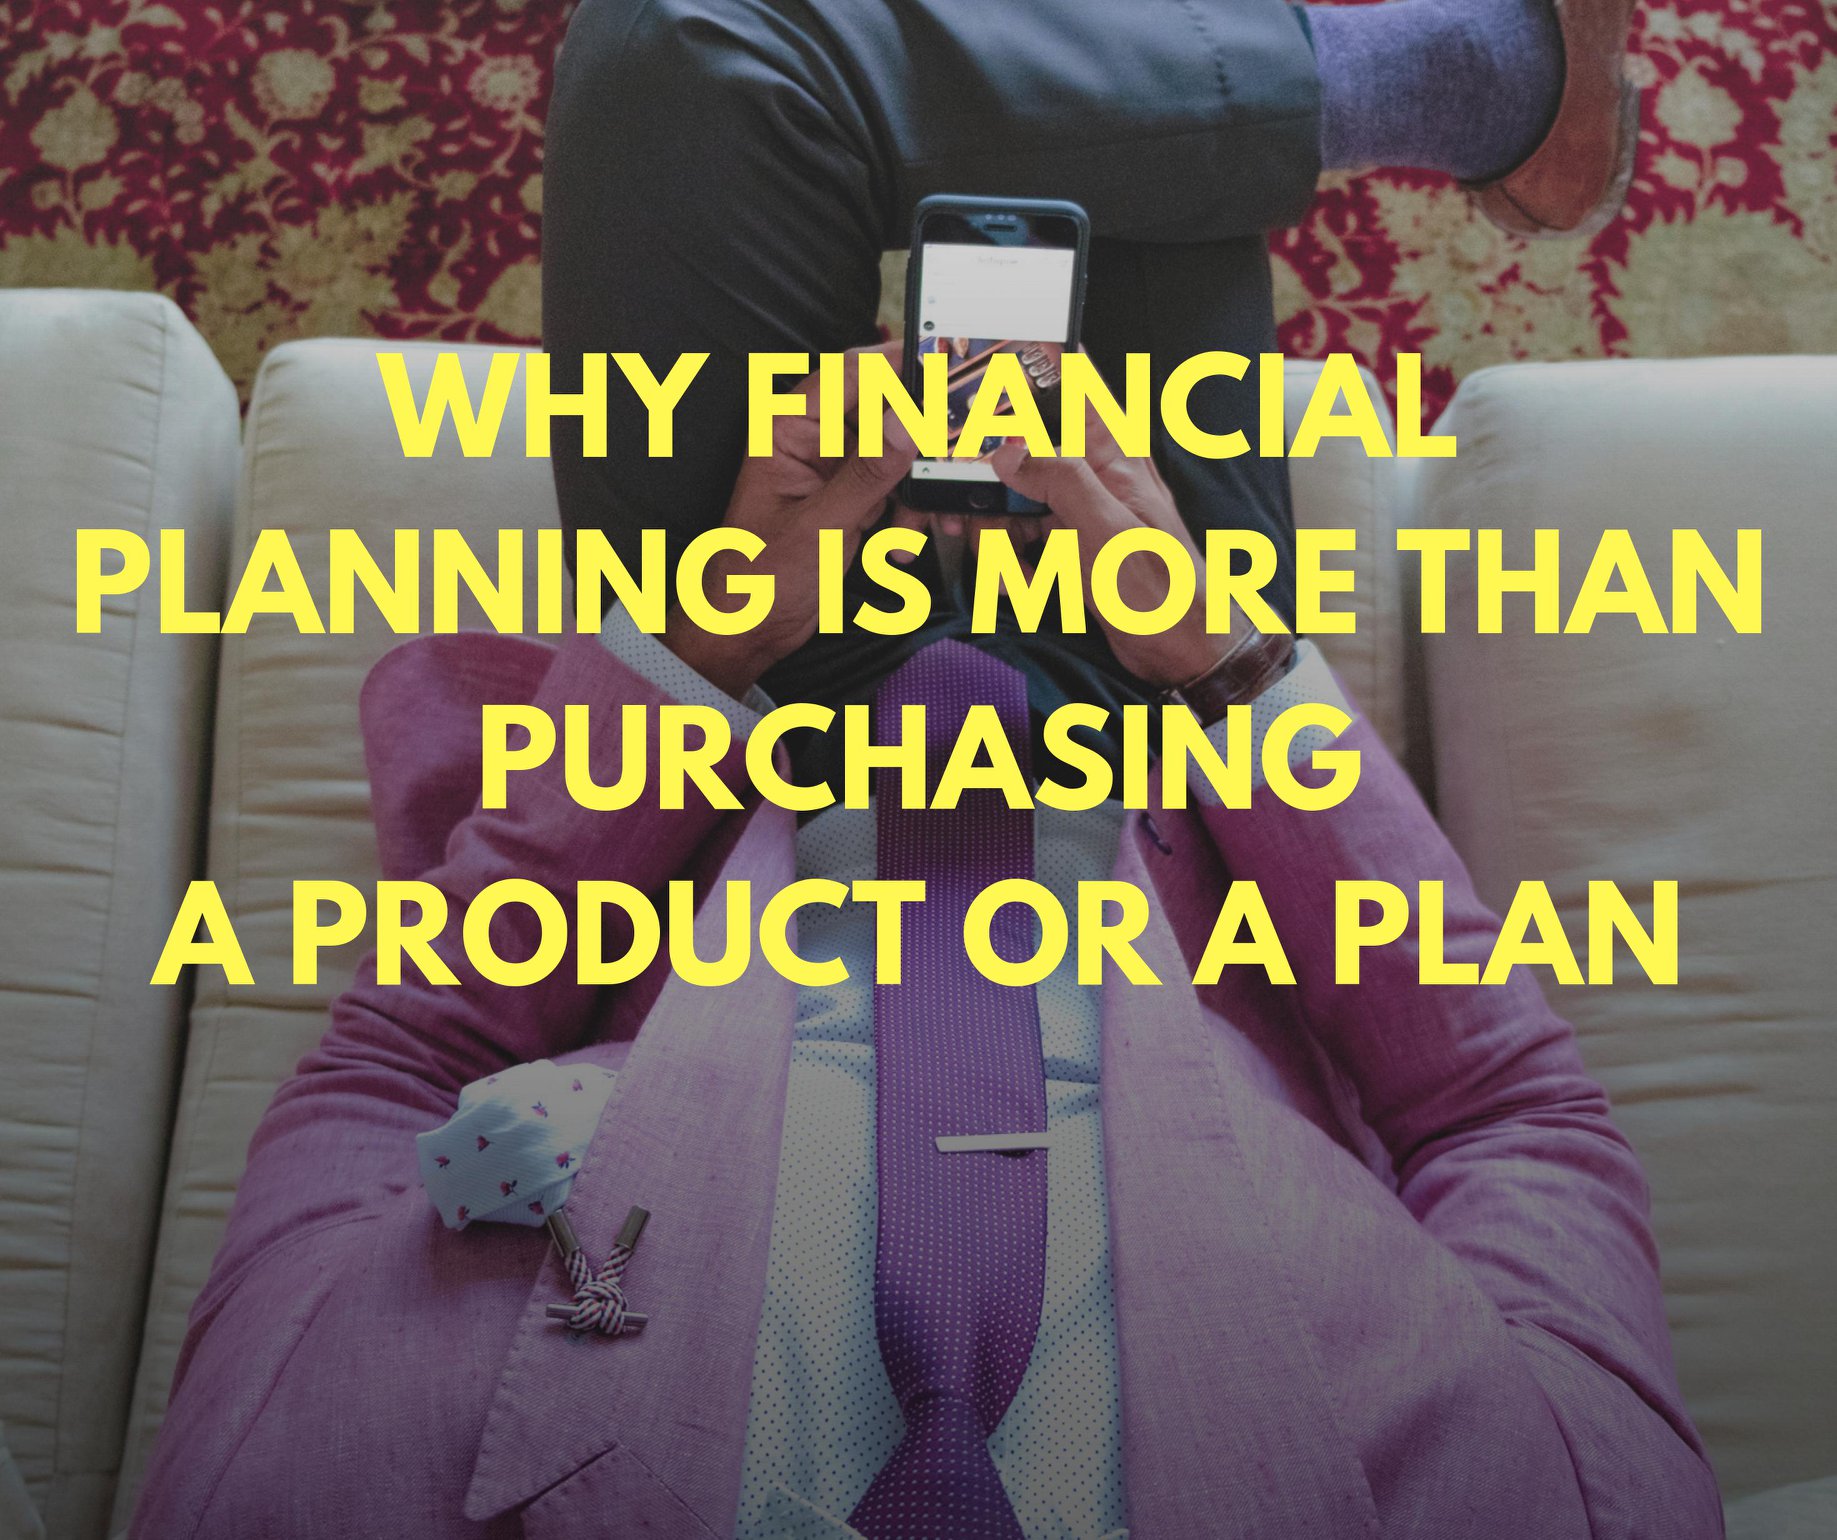 Why Financial Planning Is More than Purchasing a Product or a Plan